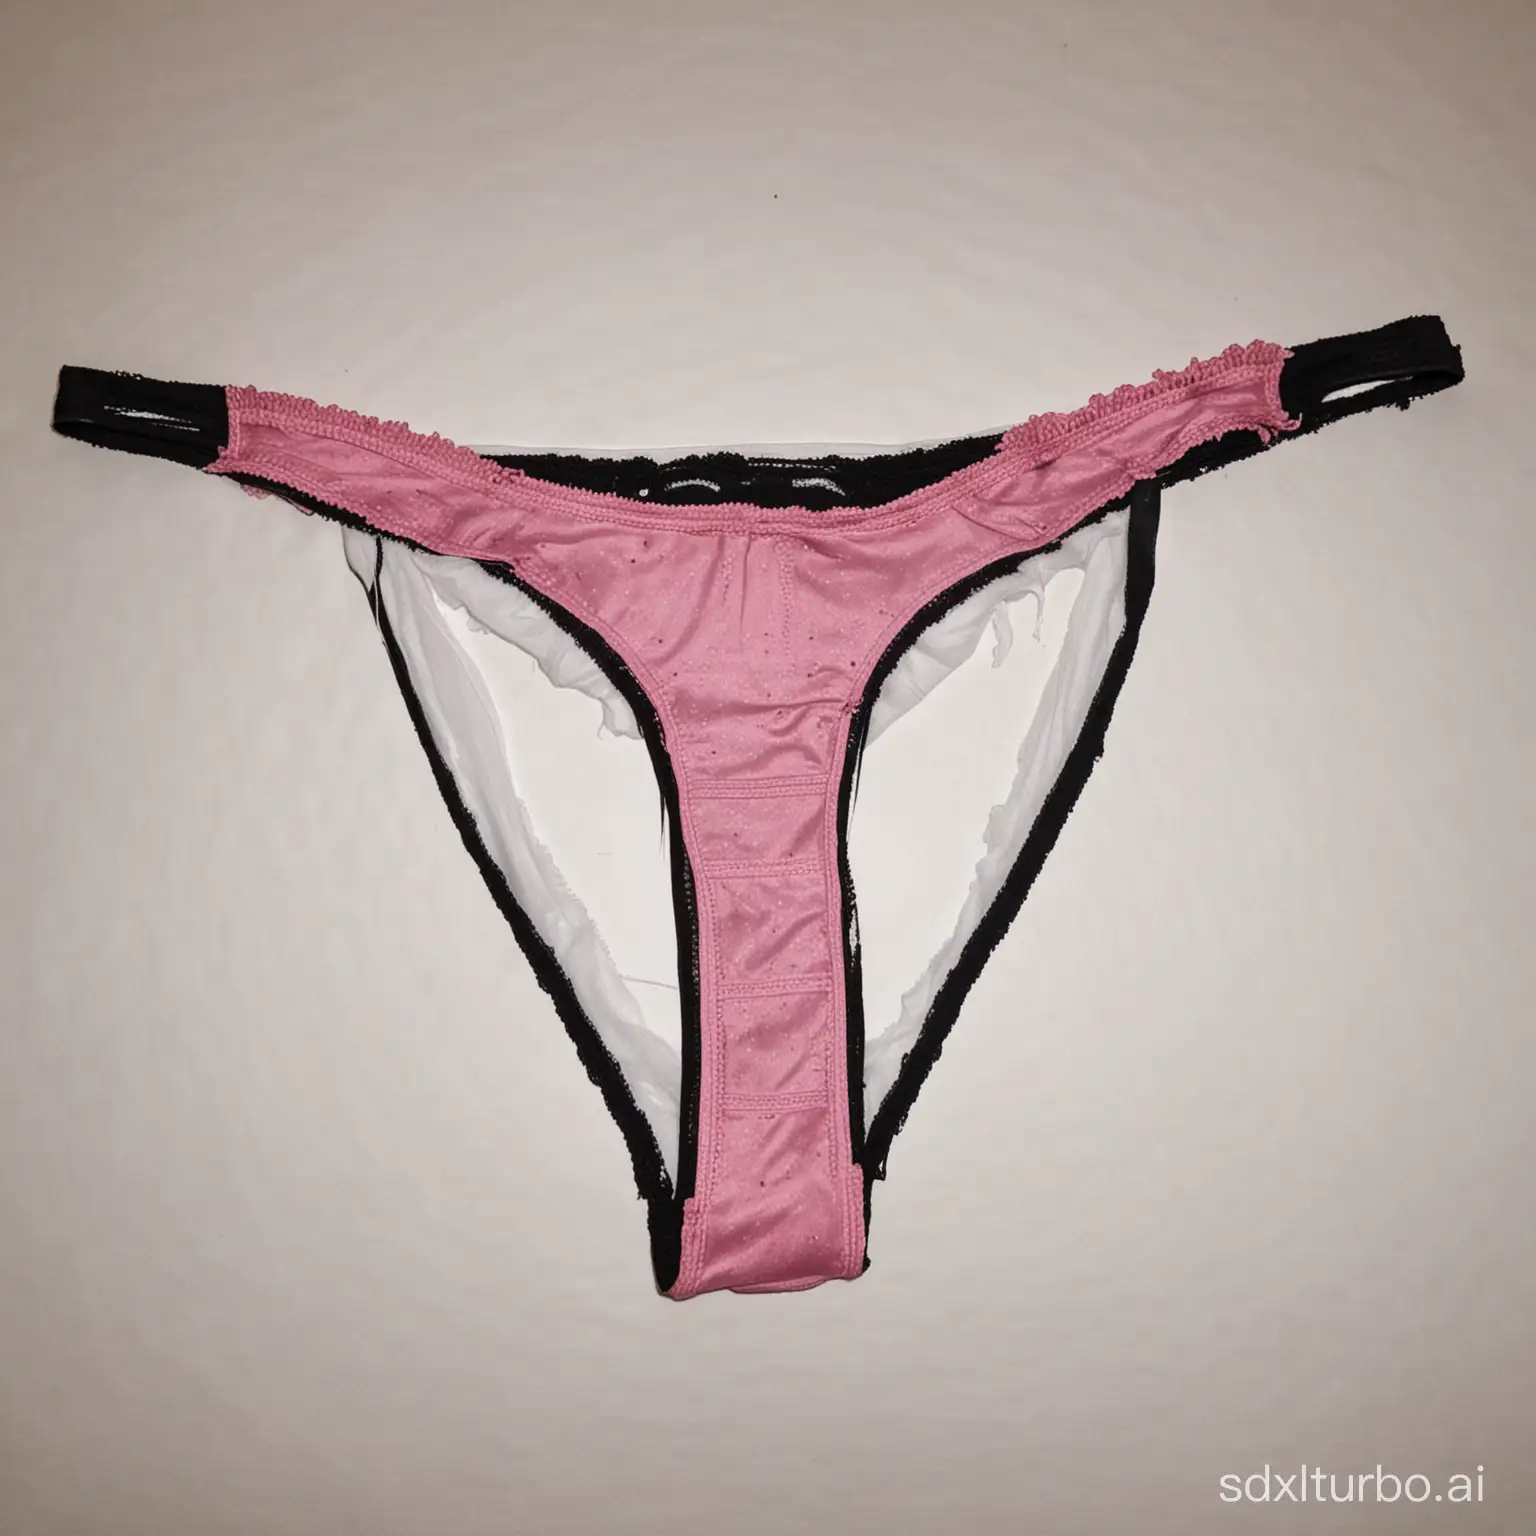 A dirty stained Pink and black thong laying on a bed, white cotton liner is showing with stains.